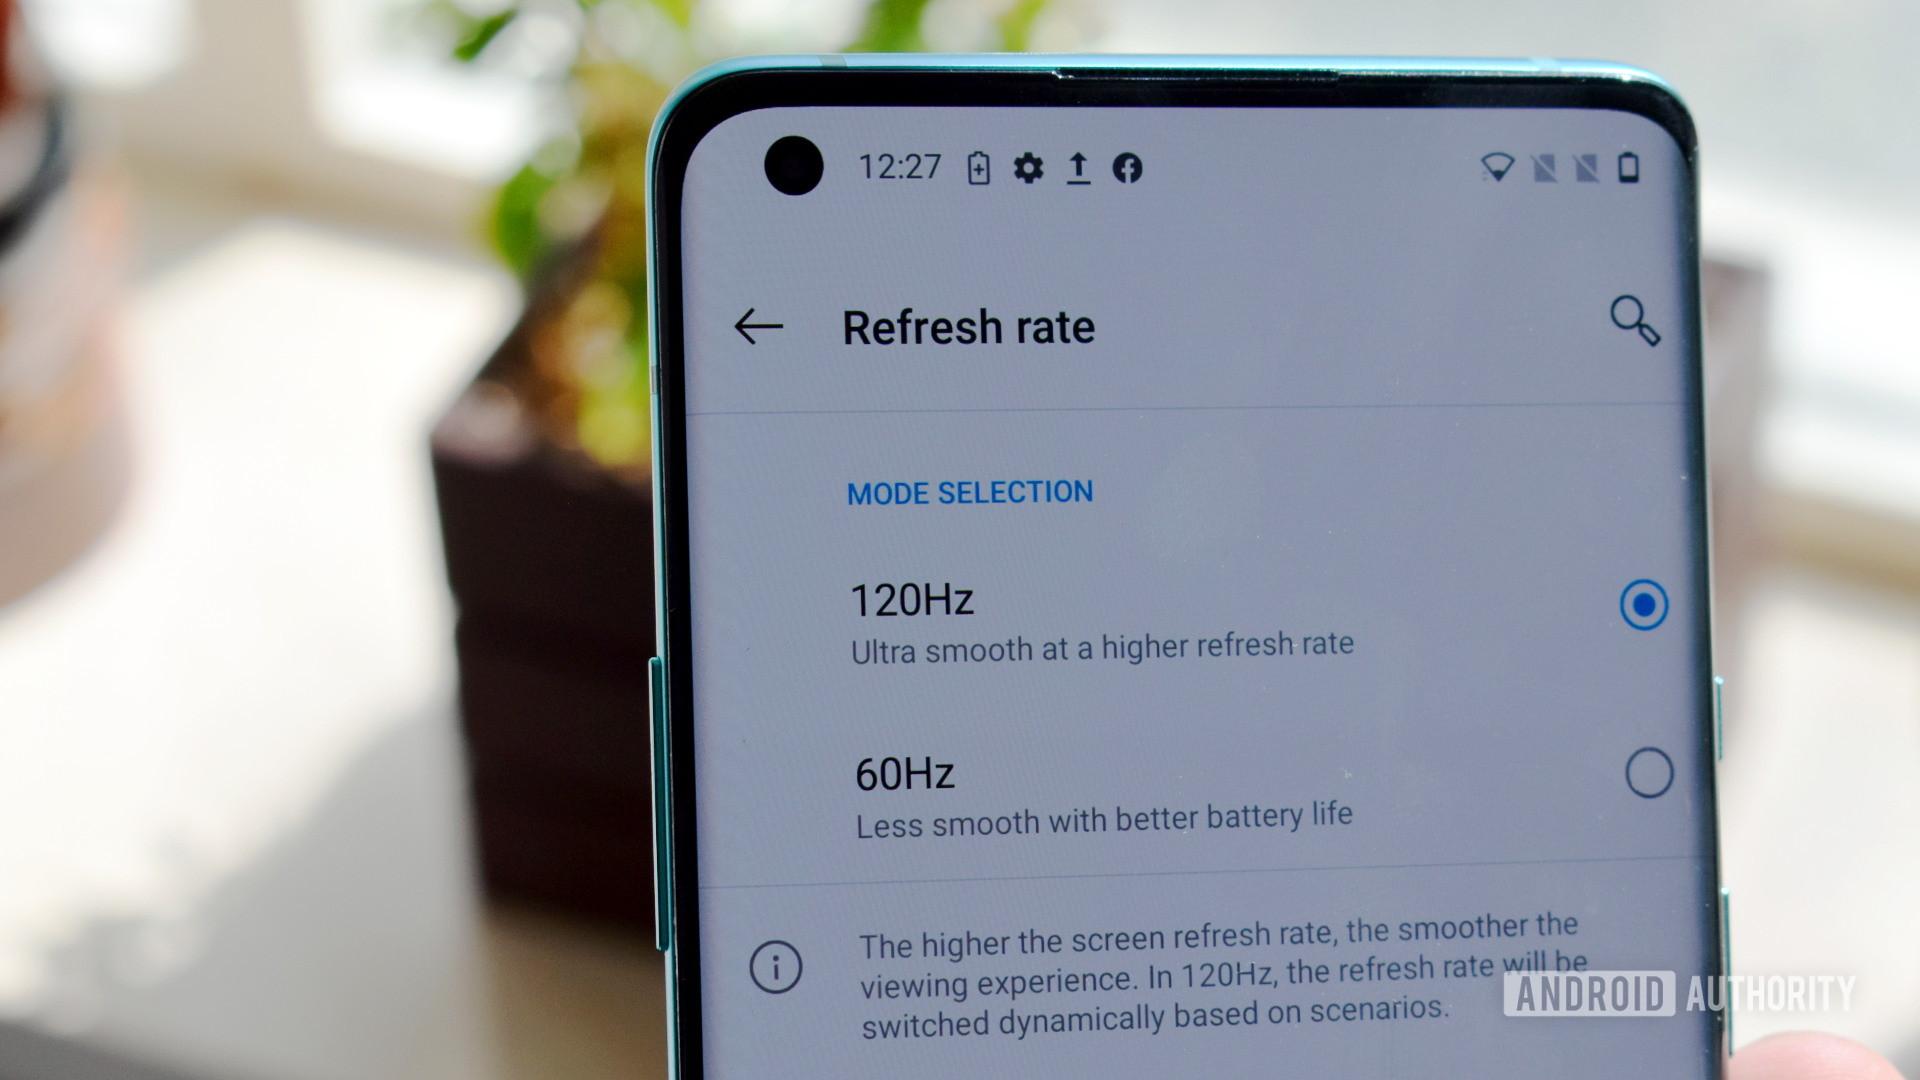 OnePlus 8 Pro 120Hz display refresh rate setting